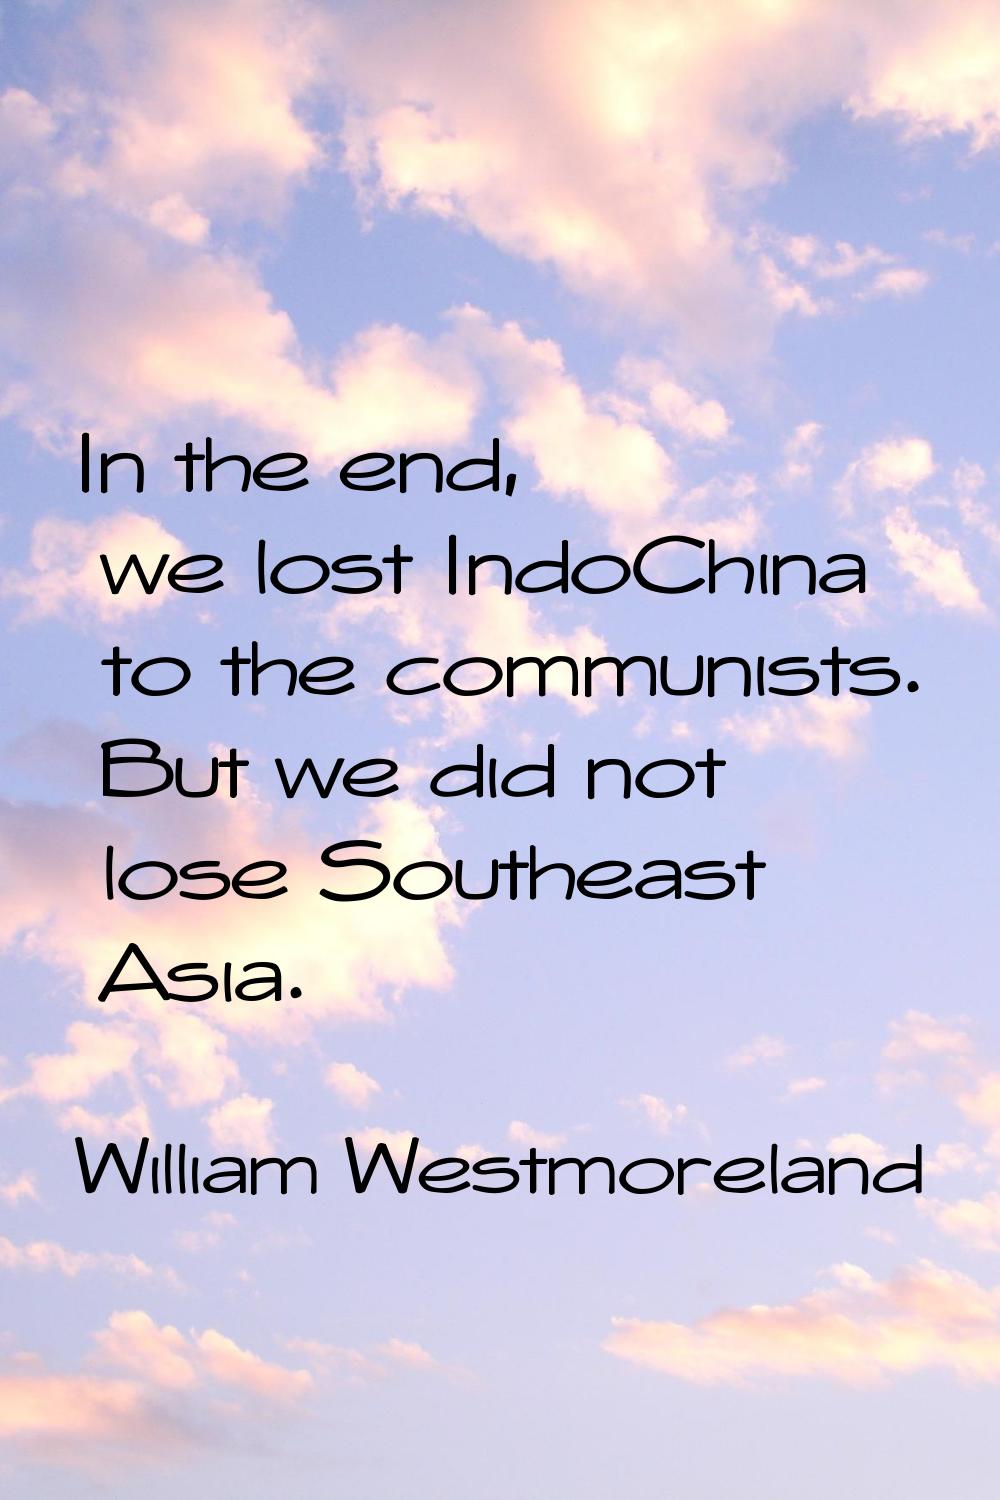 In the end, we lost IndoChina to the communists. But we did not lose Southeast Asia.